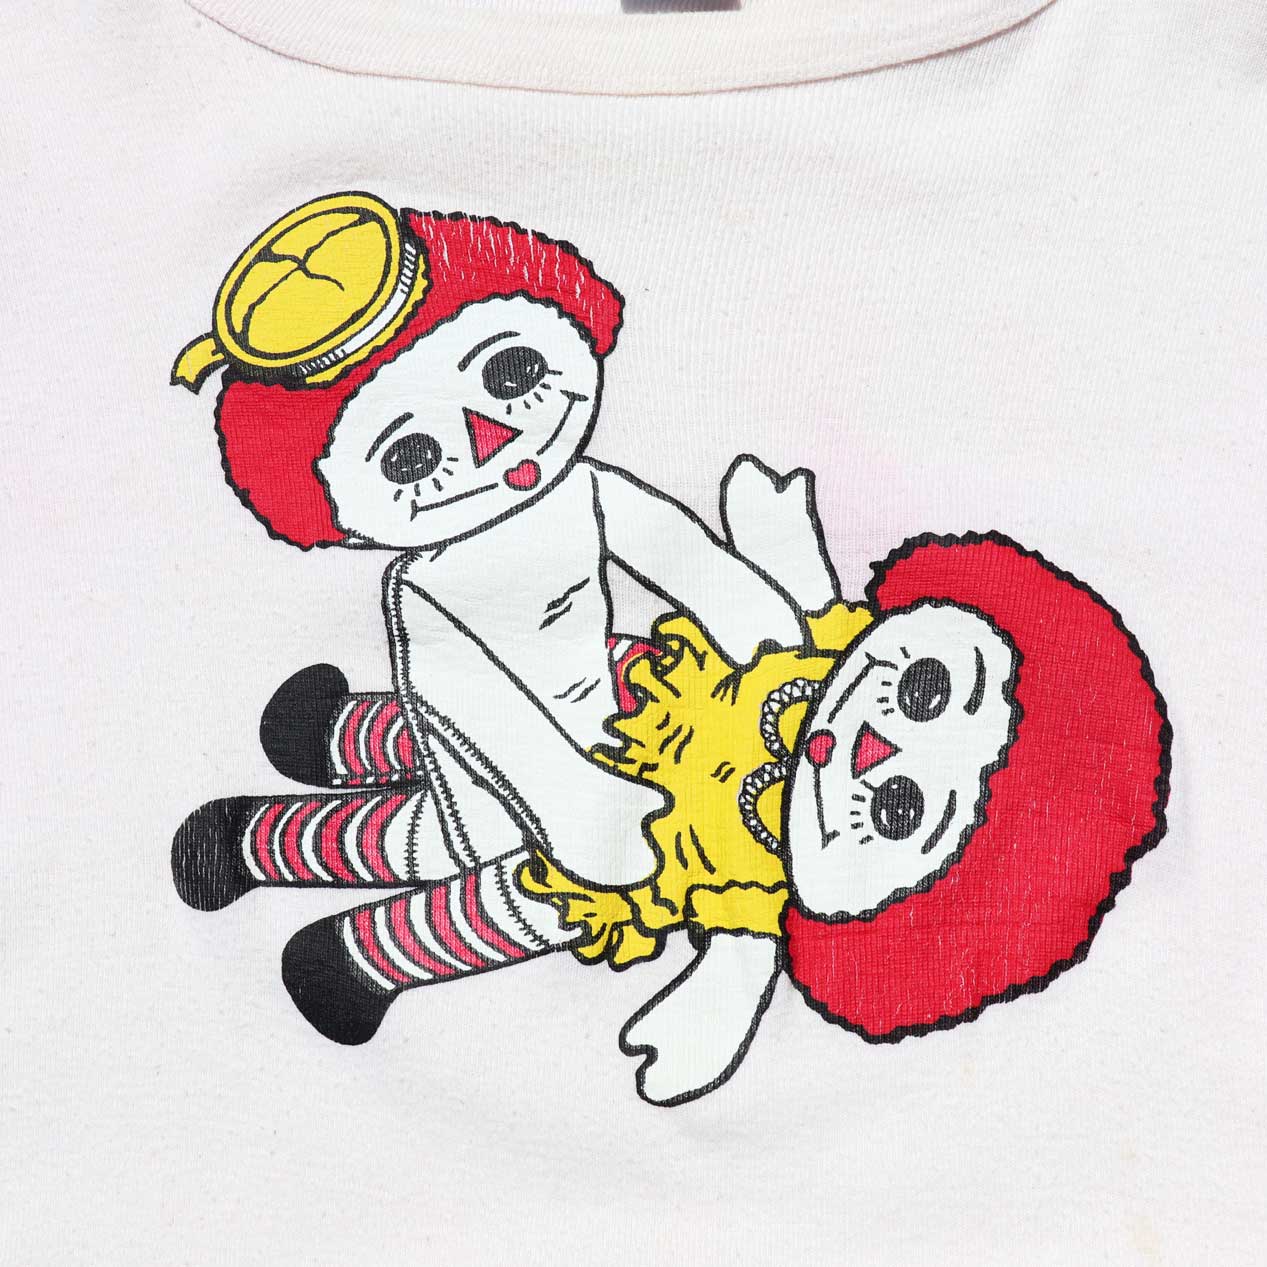 Post Junk 70 S Champion Sex Raggedy Ann And Andy Baseball T Shirt Made In U S A [xl]